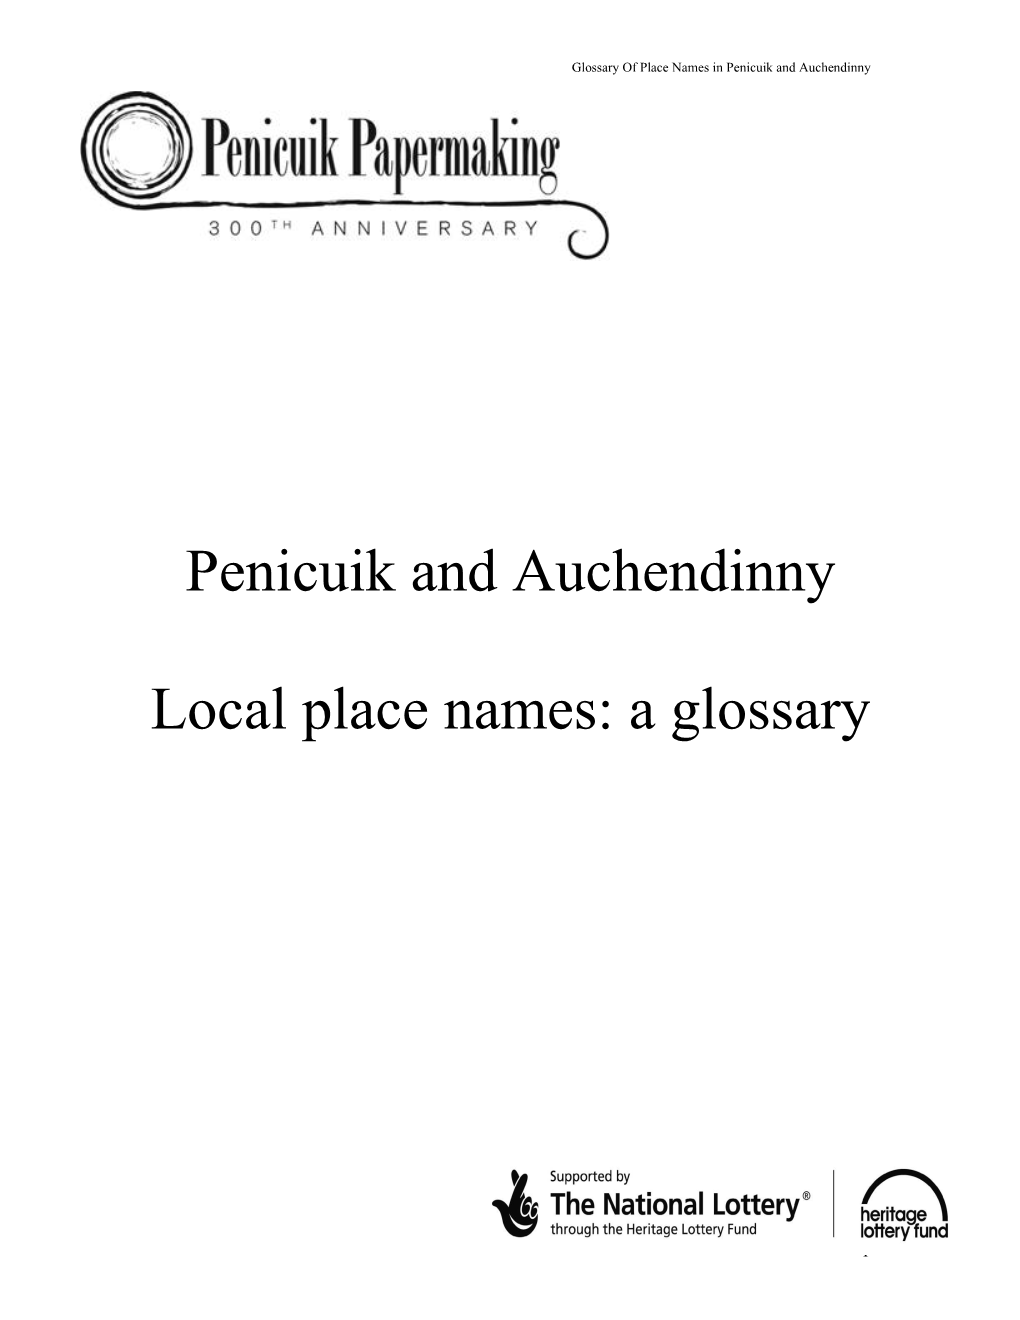 Penicuik and Auchendinny Local Place Names: a Glossary